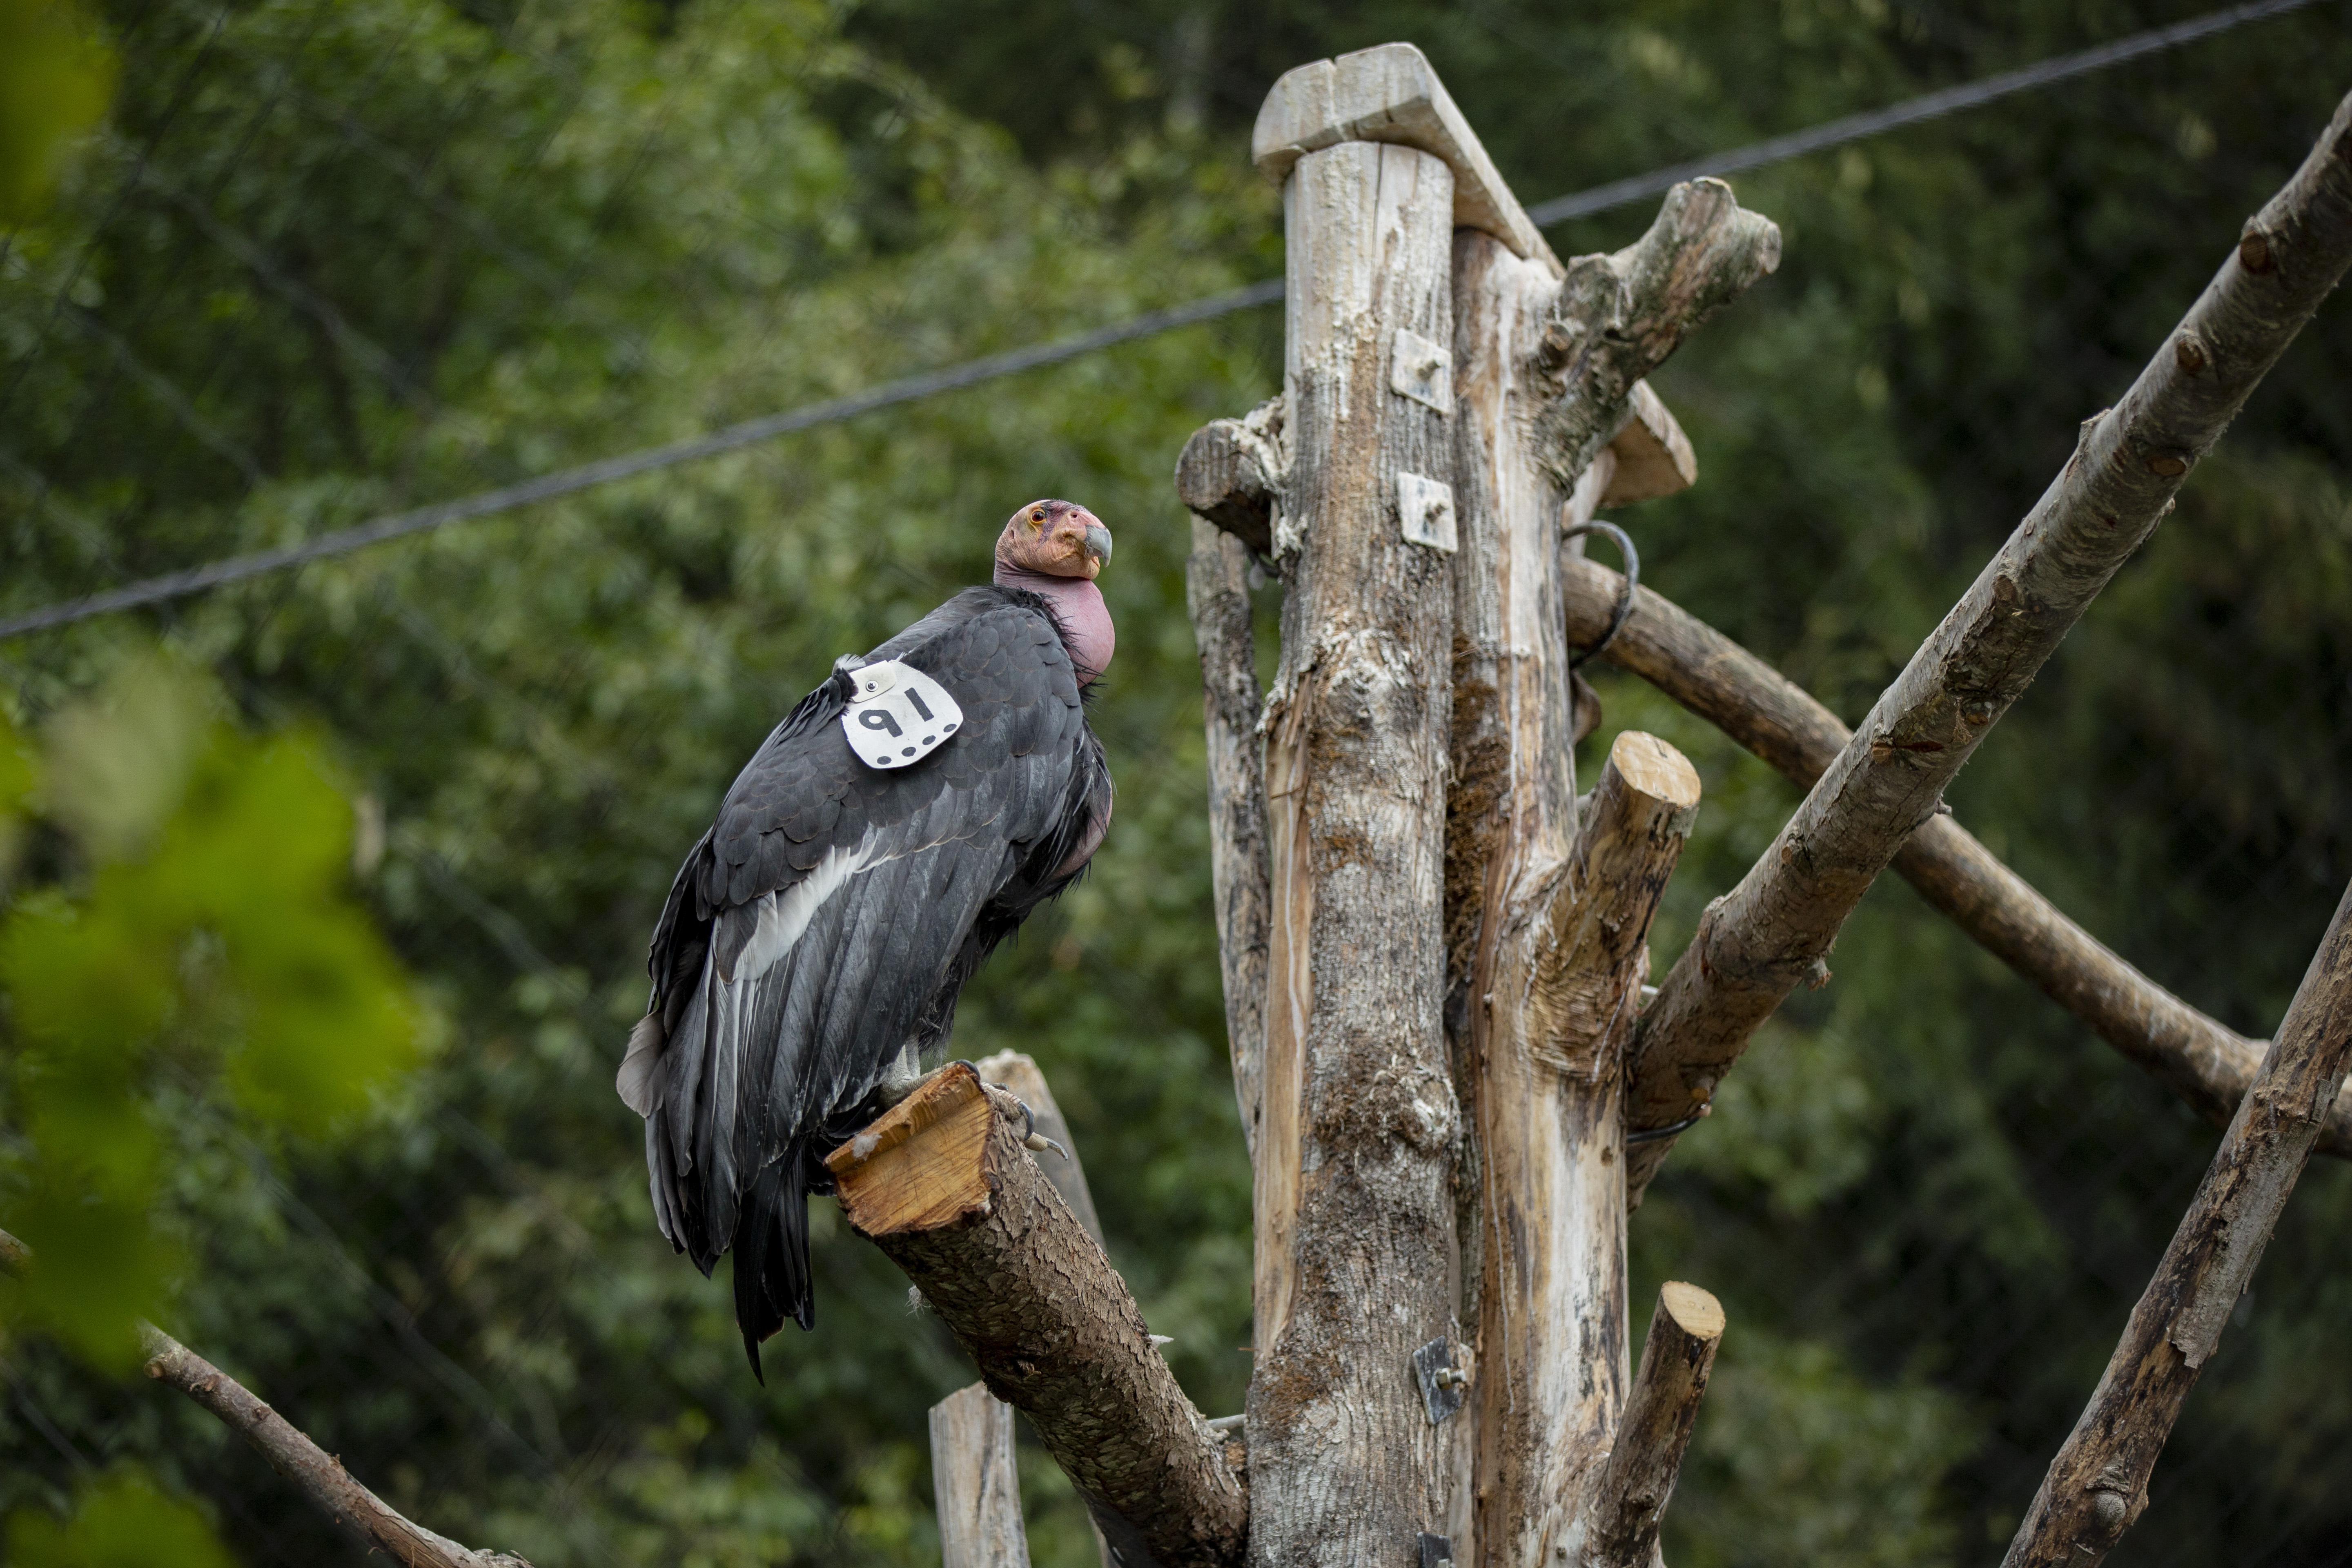 Condor No. 91, Kaweah, is one of the three California condors on exhibit at the Oregon Zoo. 